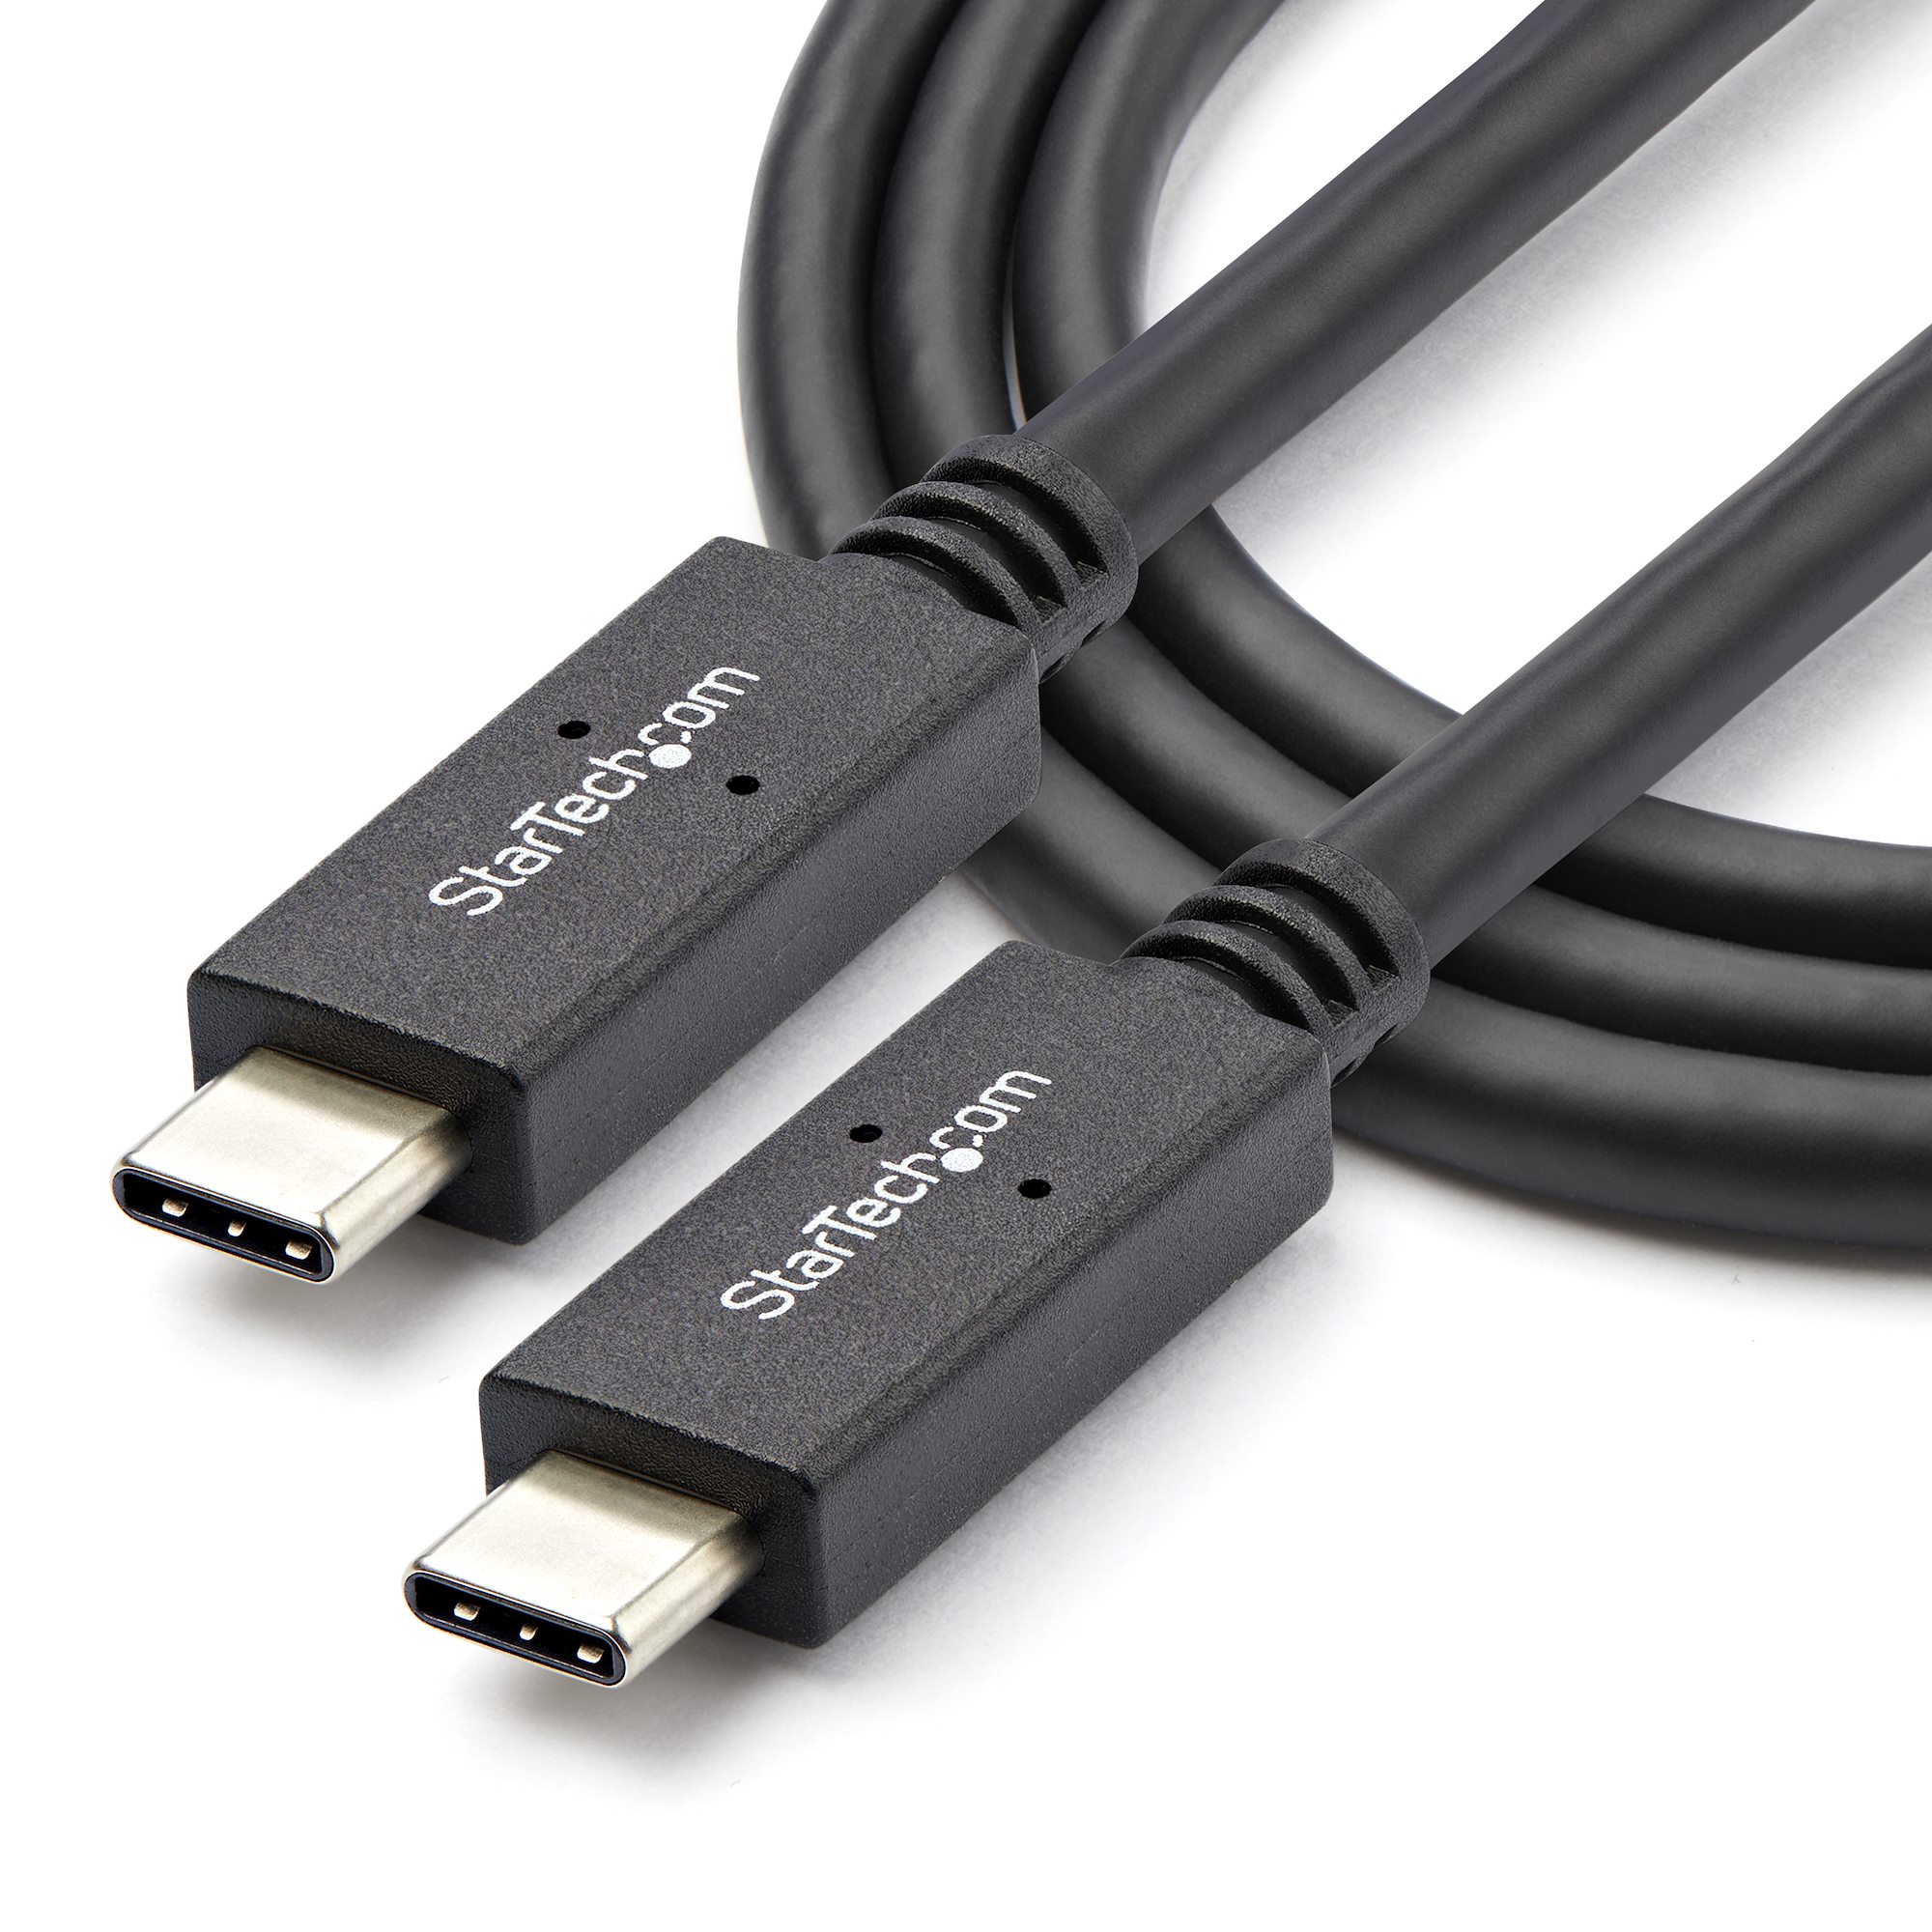 USB-C Cable - M/M - 1m (3ft) - USB 3.1 (10Gbps) - USB-IF Certified